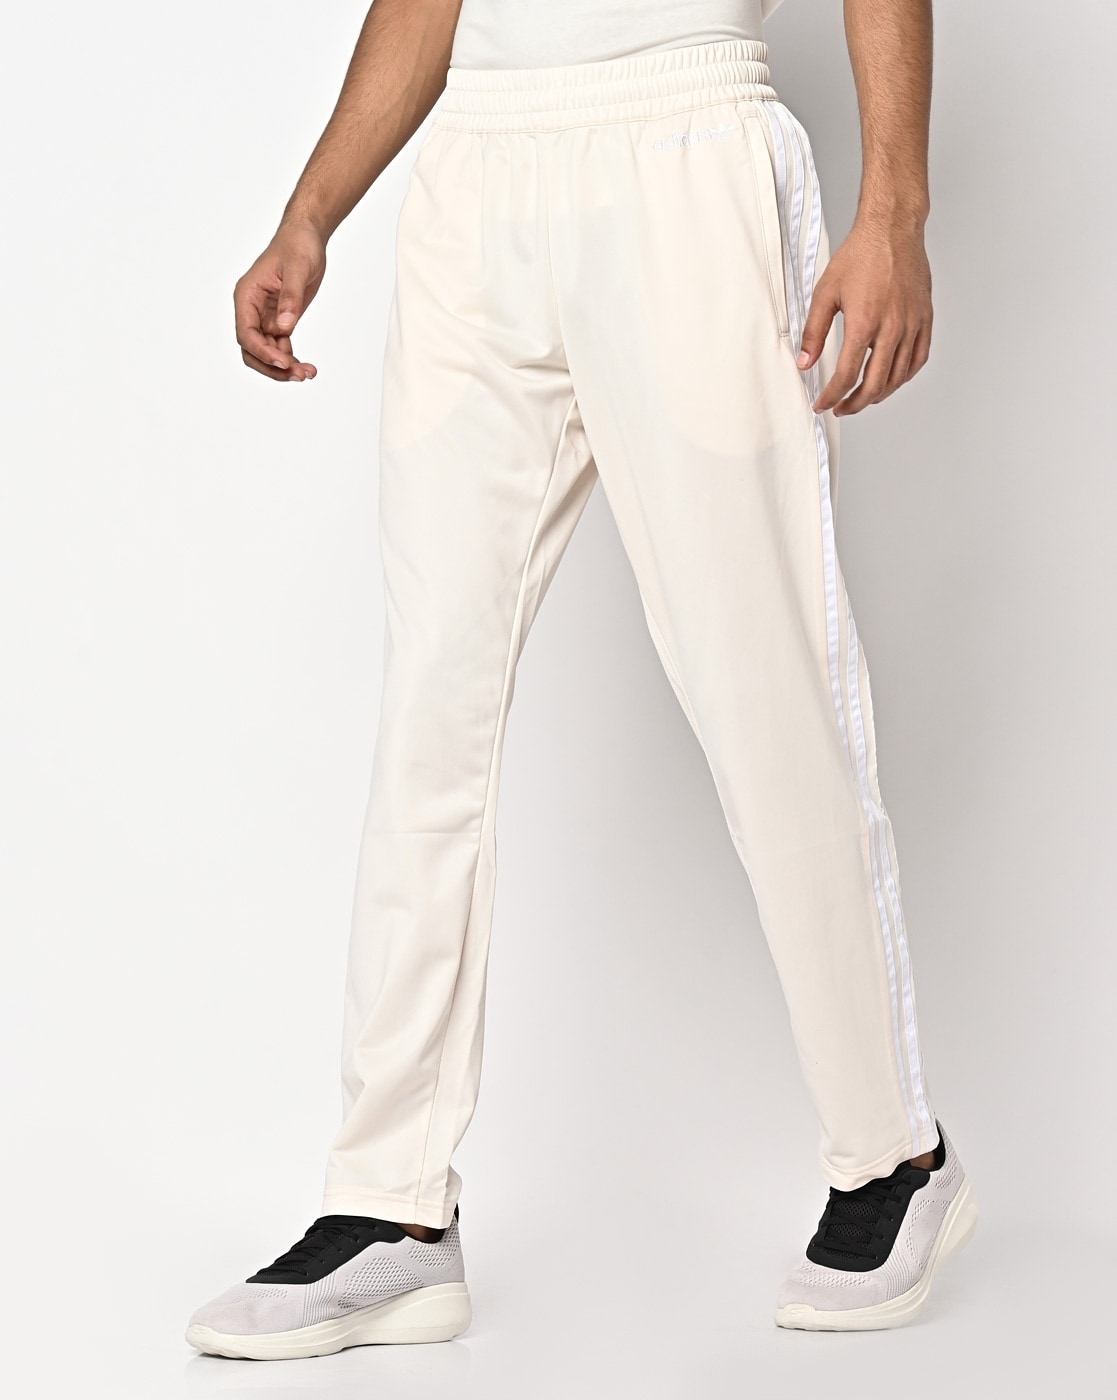 Cotton Track Pants - Buy Cotton Track Pants Online Starting at Just ₹212 |  Meesho